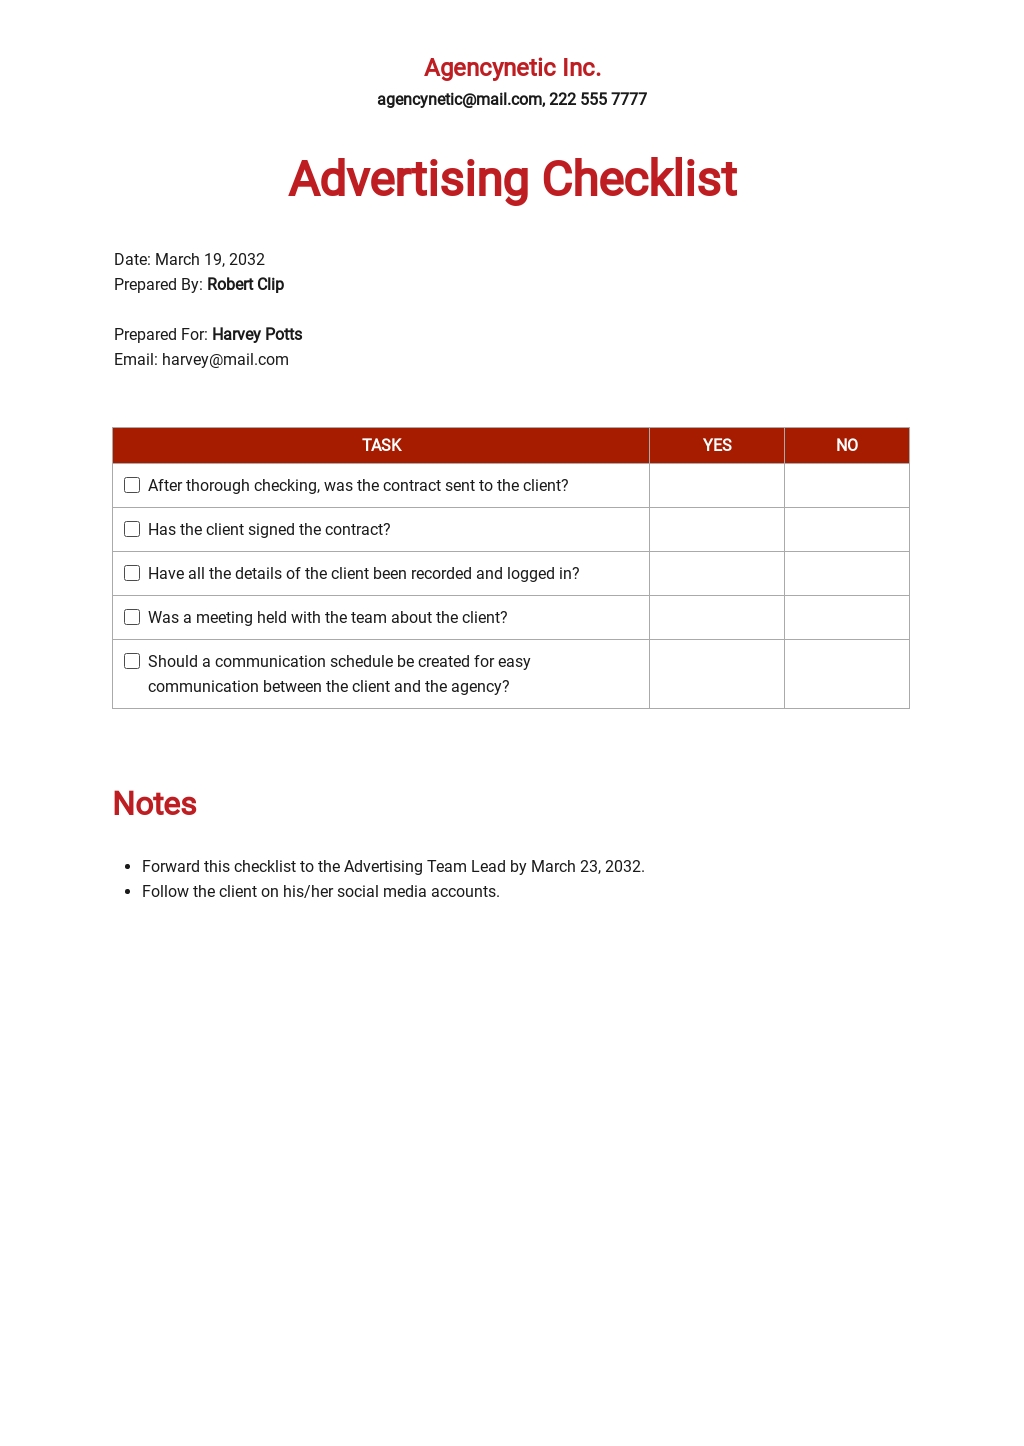 Advertising Agency Client Onboarding Checklist Template.jpe